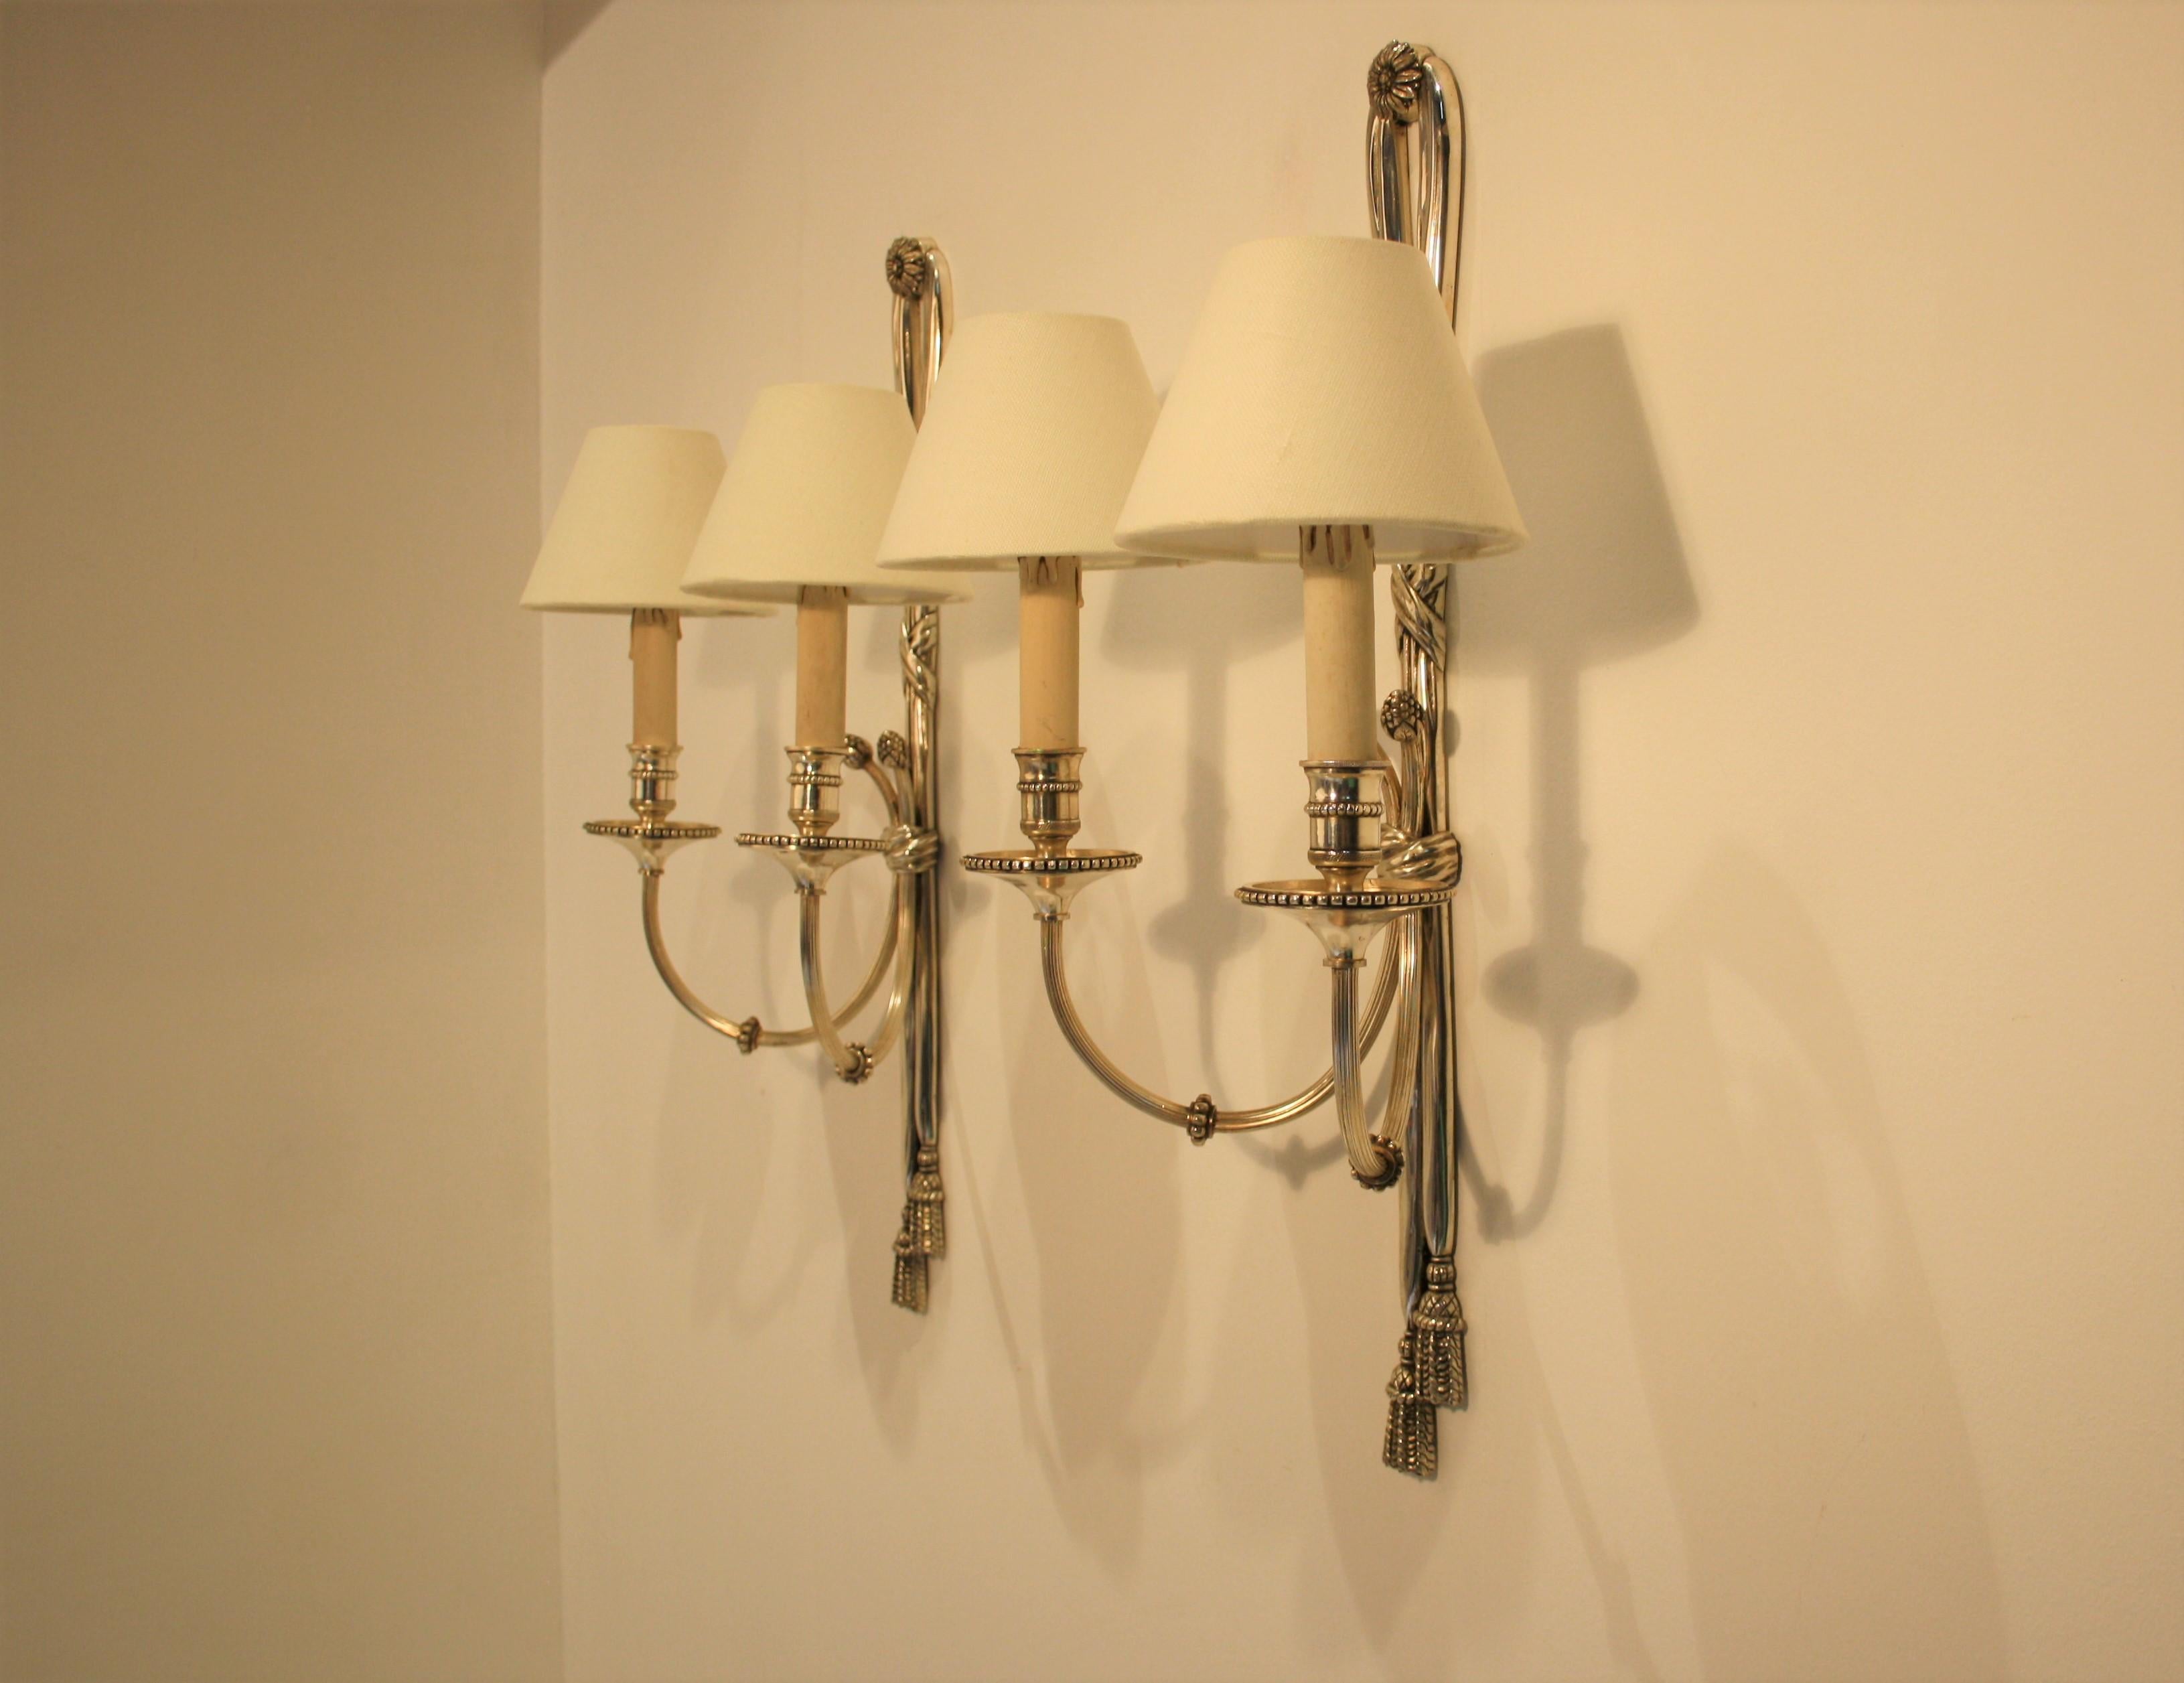 A pair of very fine cast silvered bronze sconces from the famous Maison Baguès in Paris in a very simple but stylish Louis XVI style.
Baguès was started in Auvergne, circa 1840. Initially specialized in liturgical bronze, the company developed at